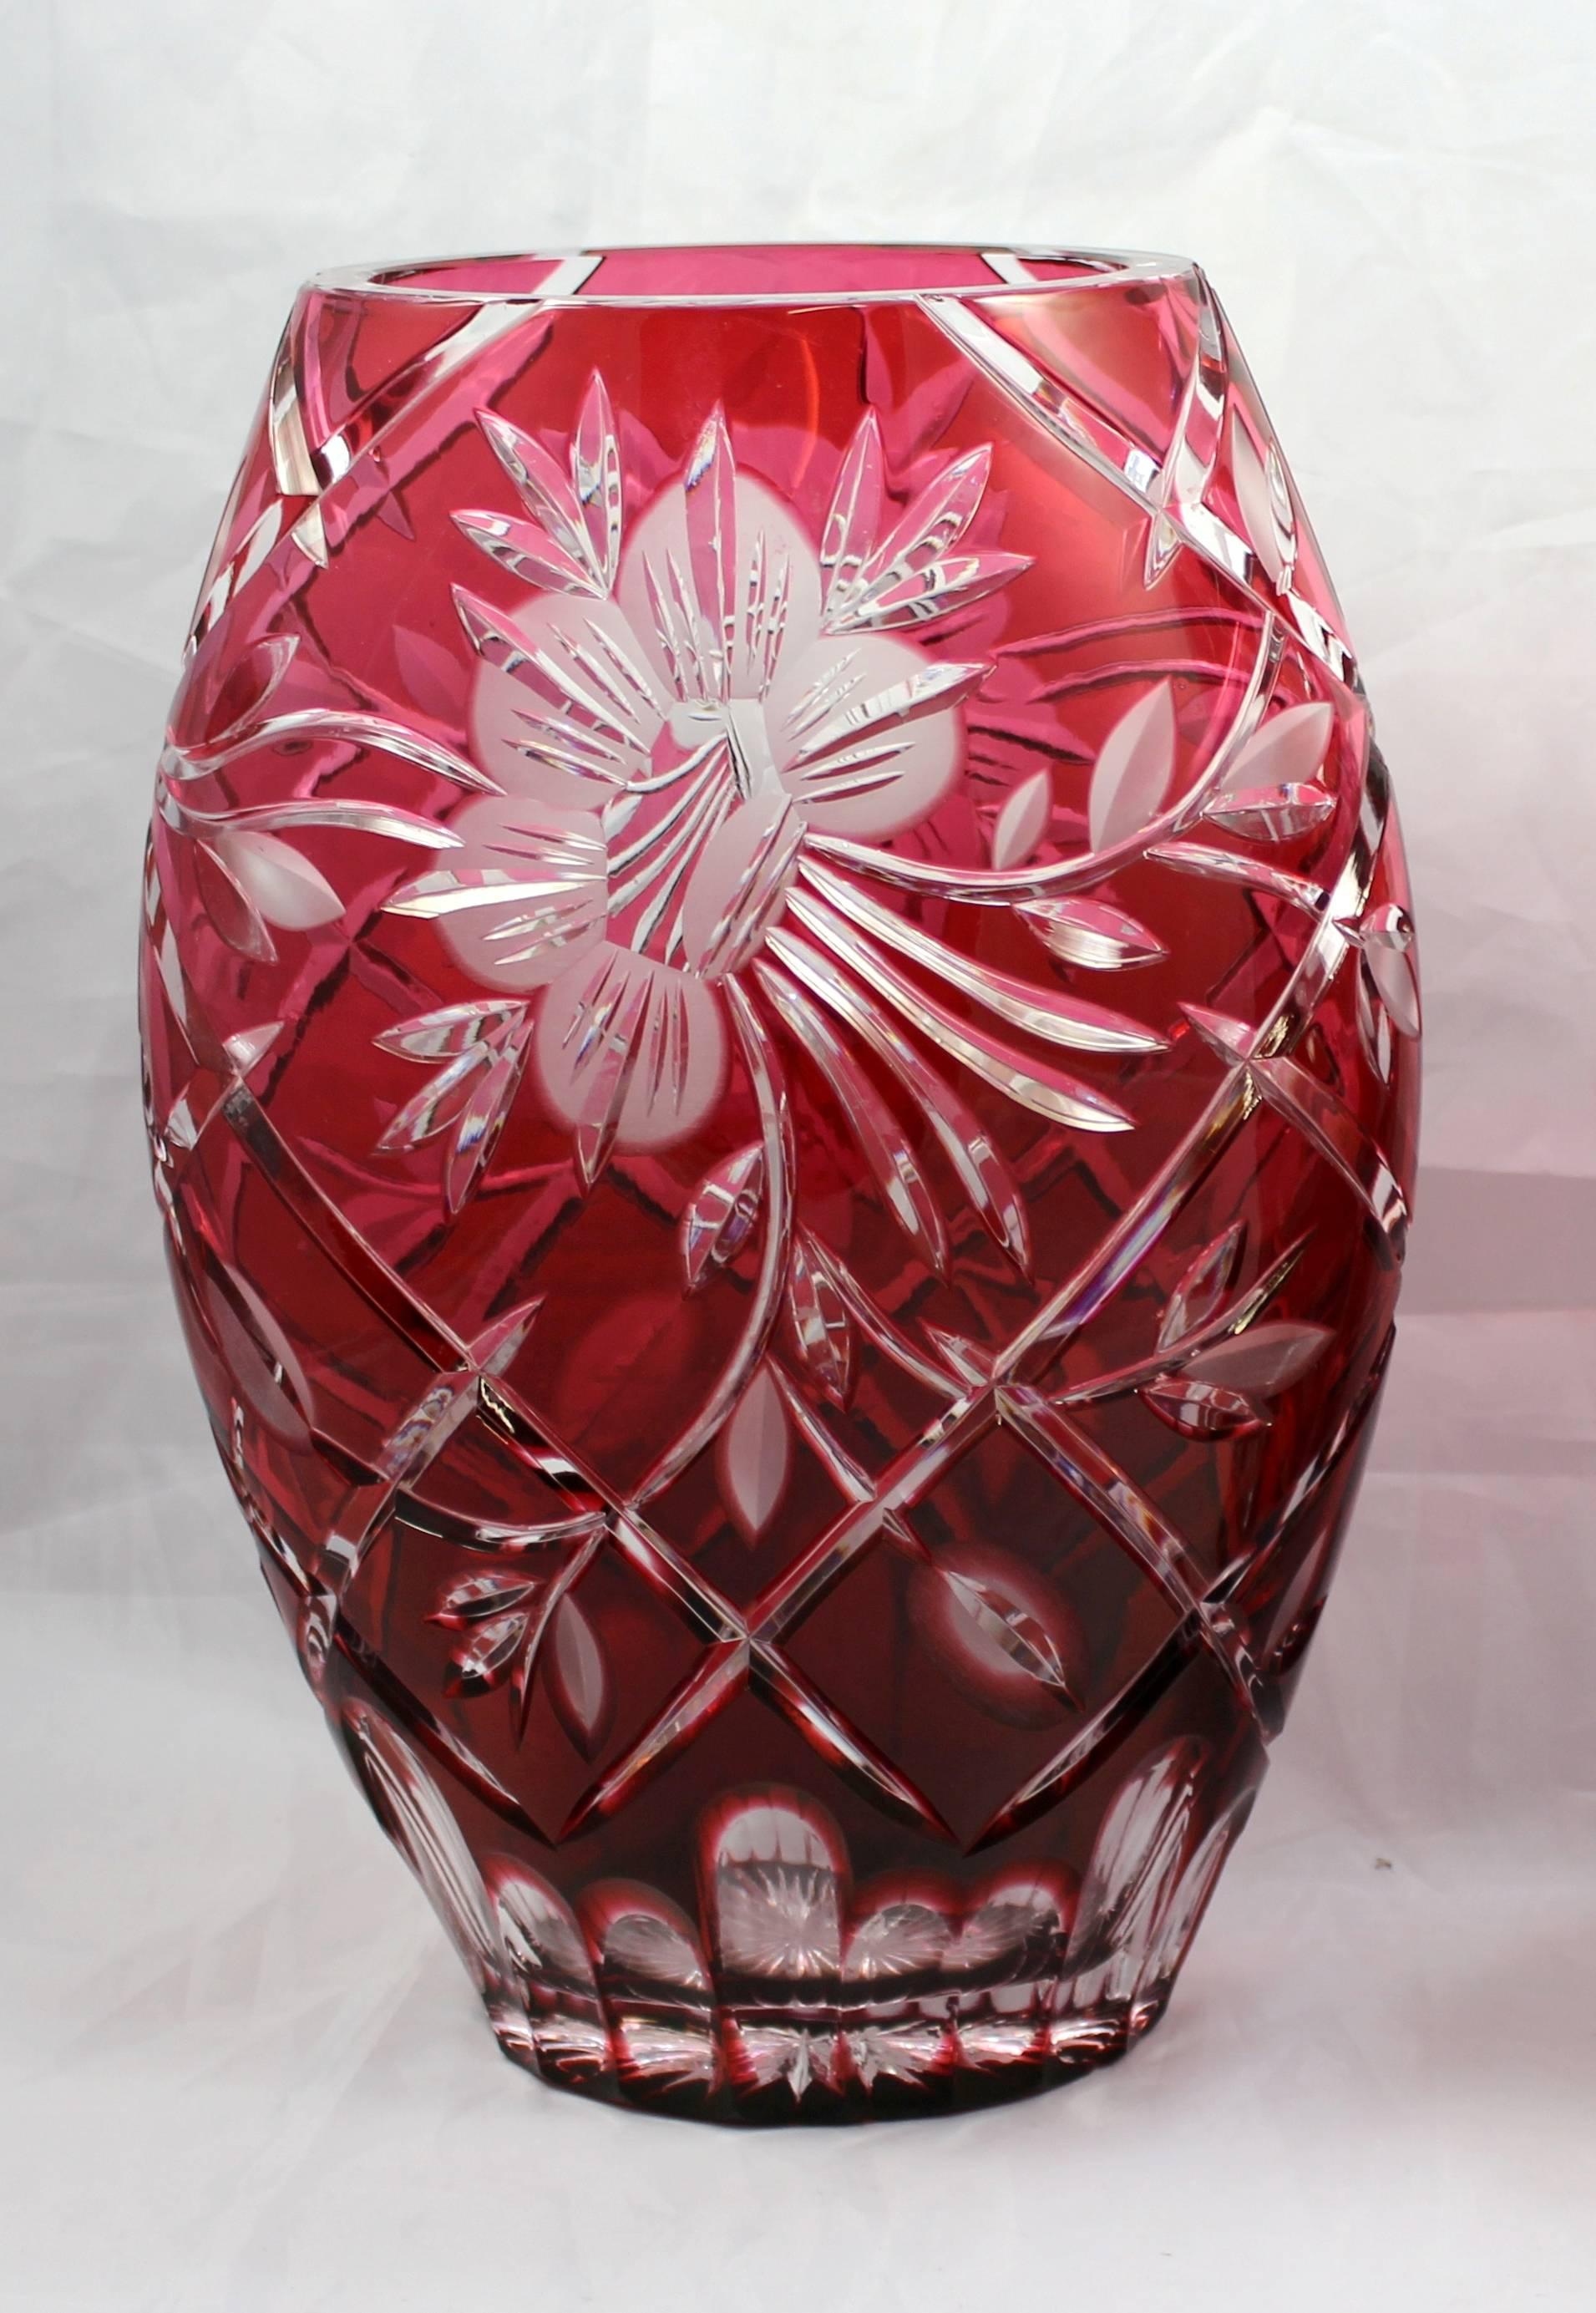 

Crystal	Ruby
Date	50's
Origin	Bohemian
Type	Vase
Width	18 cm / 7 in
Depth	12 cm / 4 3/4 in
Height	26 cm / 10 1/4 in
Glass	Cut glass, overlay crystal
Colour	Ruby overlay
Condition	Very good condition. No chips, cracks or repairs

FREE